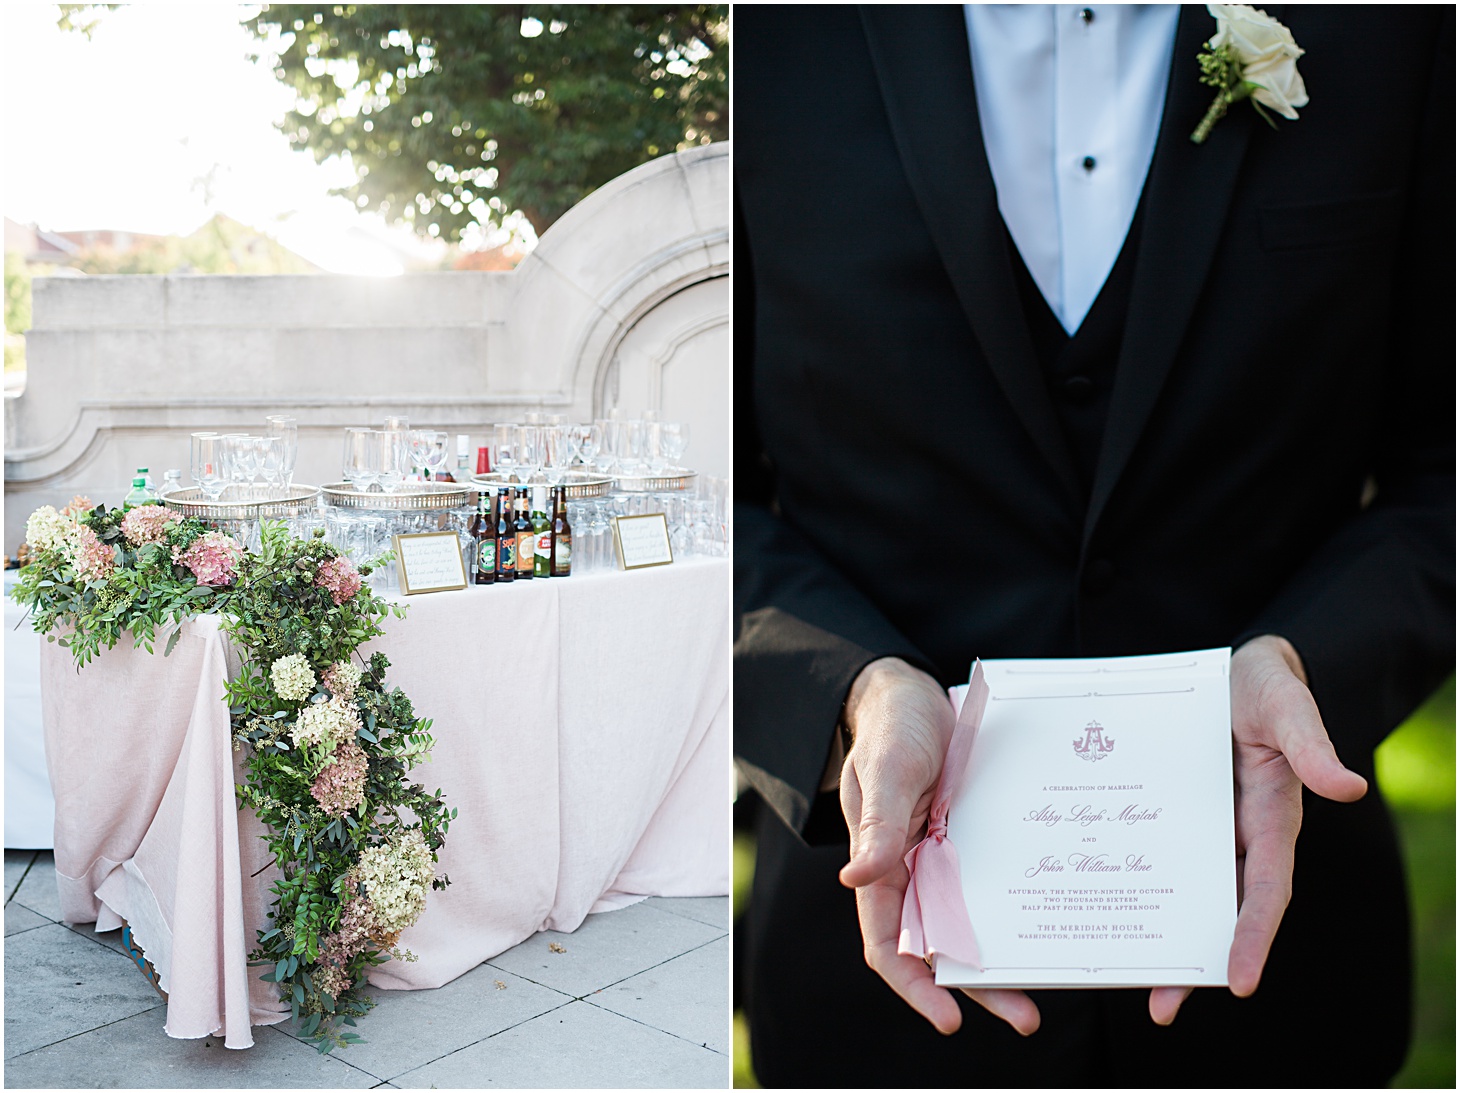 Planning by Strawberry Milk Events - A Thoroughly Washingtonian Wedding at Meridian House in DC by Sarah Bradshaw 